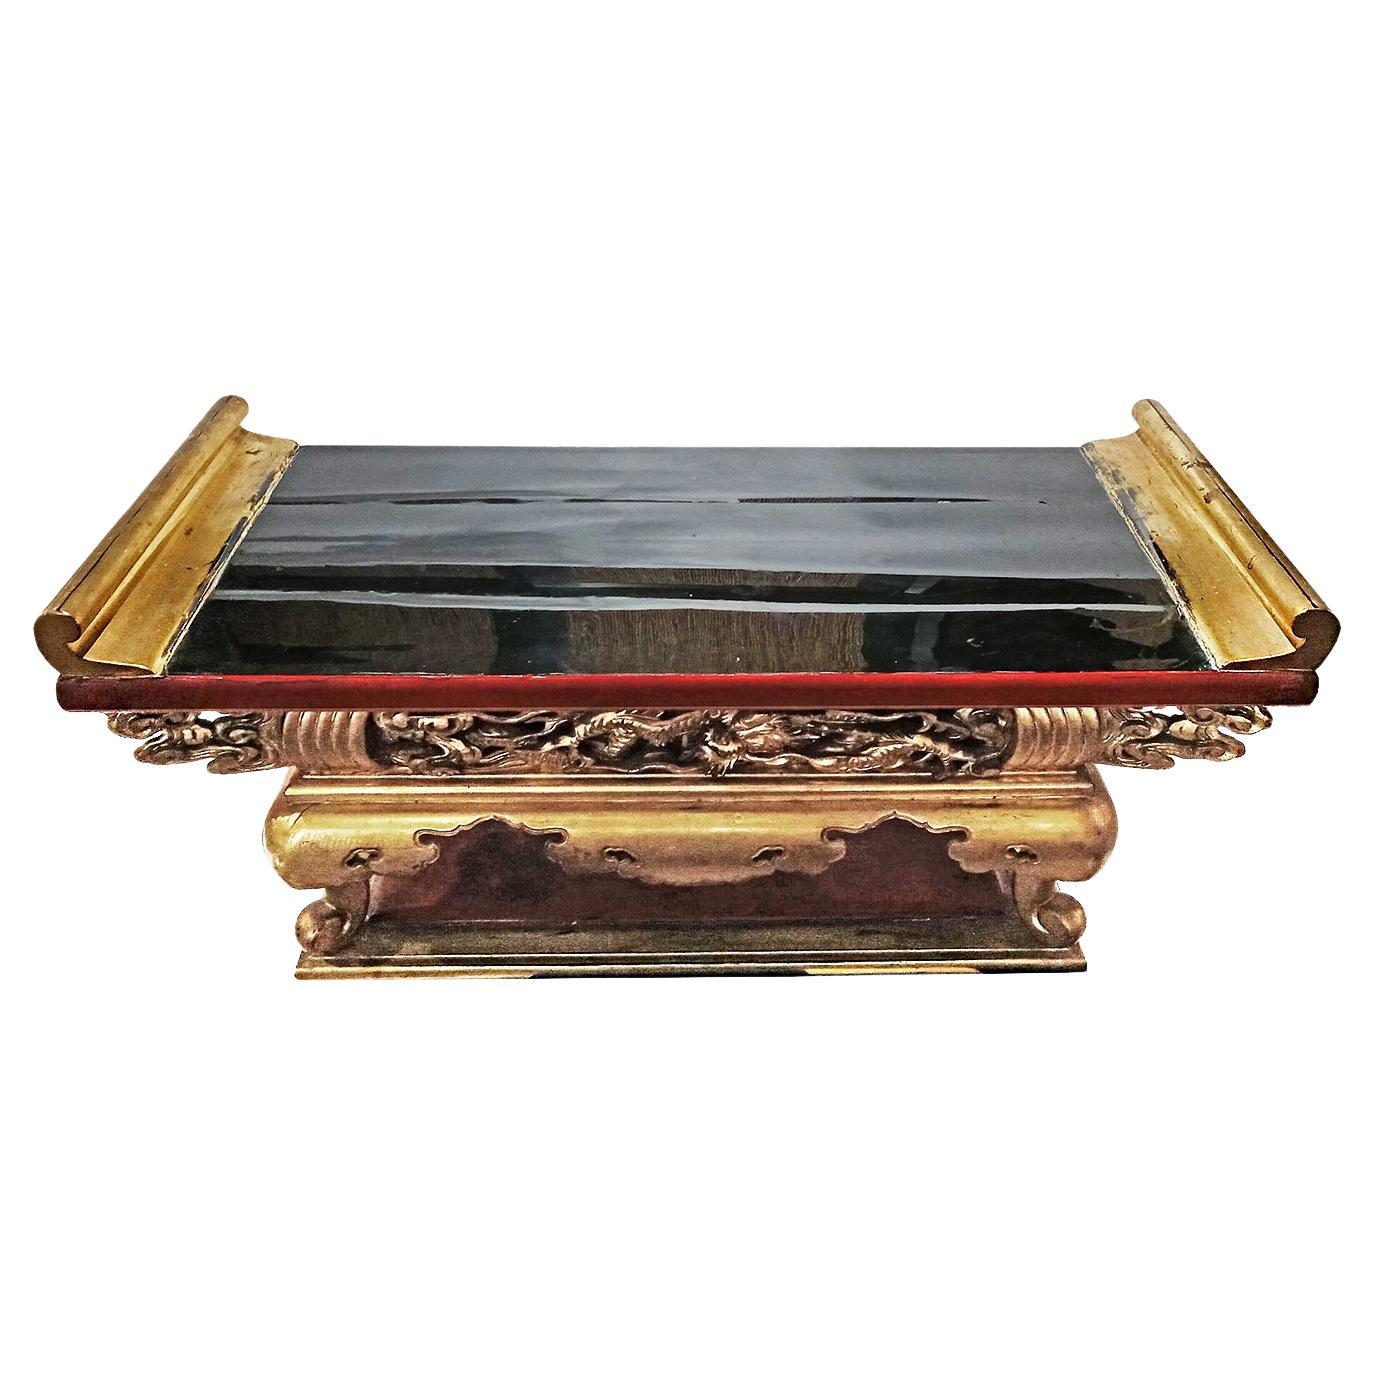 Japanese Lacquered Altar Table, Showa Period, Mid-20th Century